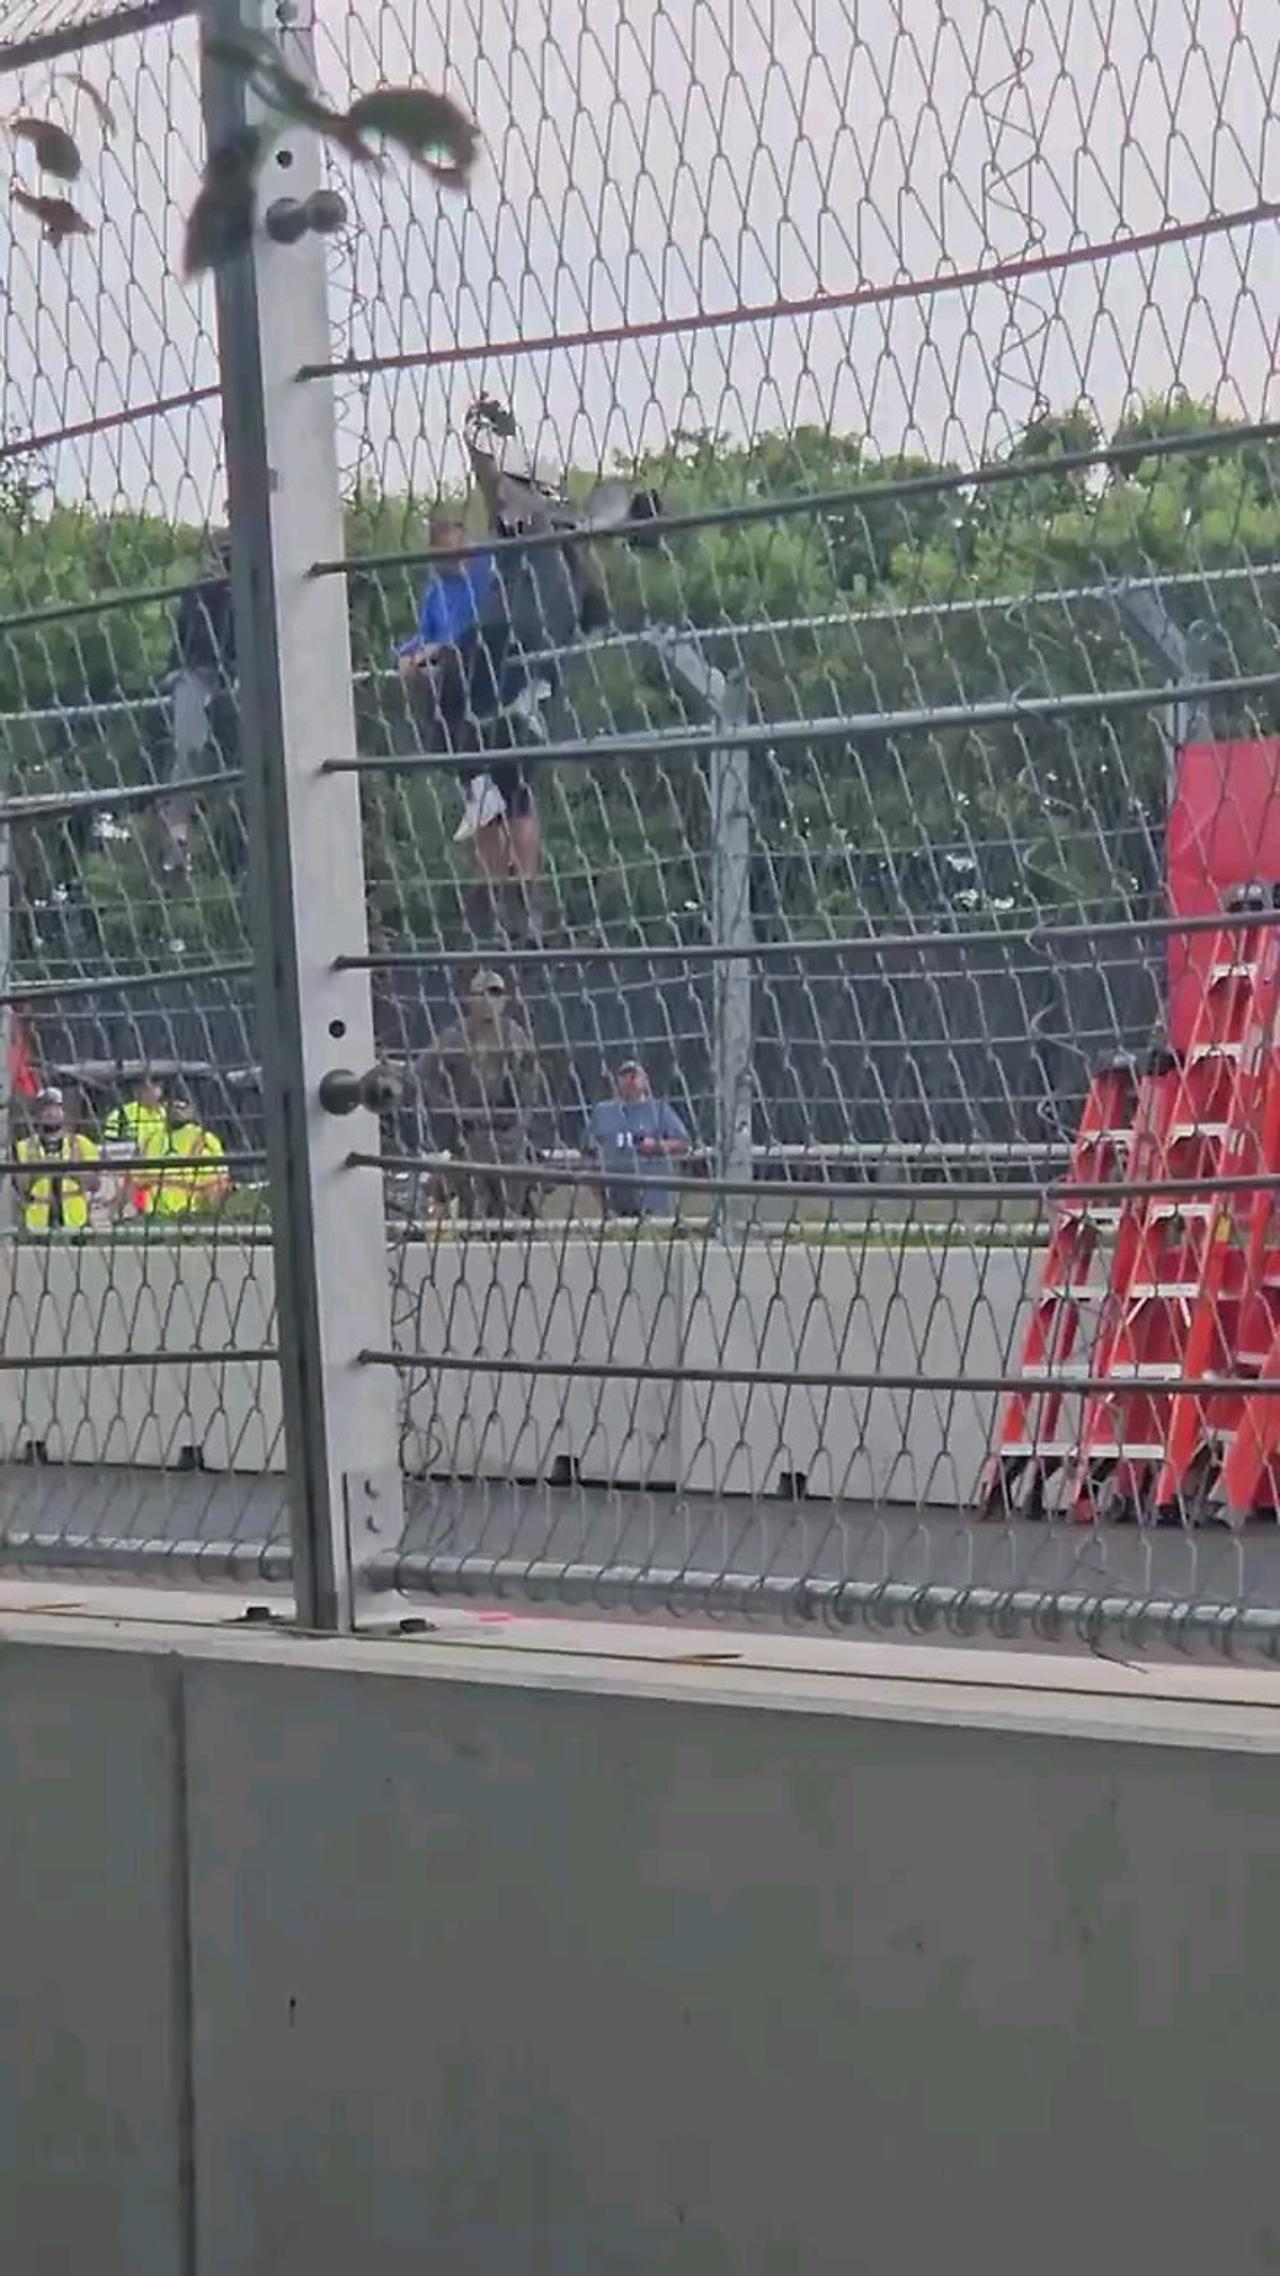 Go Cry to Mommy! Protesting at a NASCAR event gone wrong.